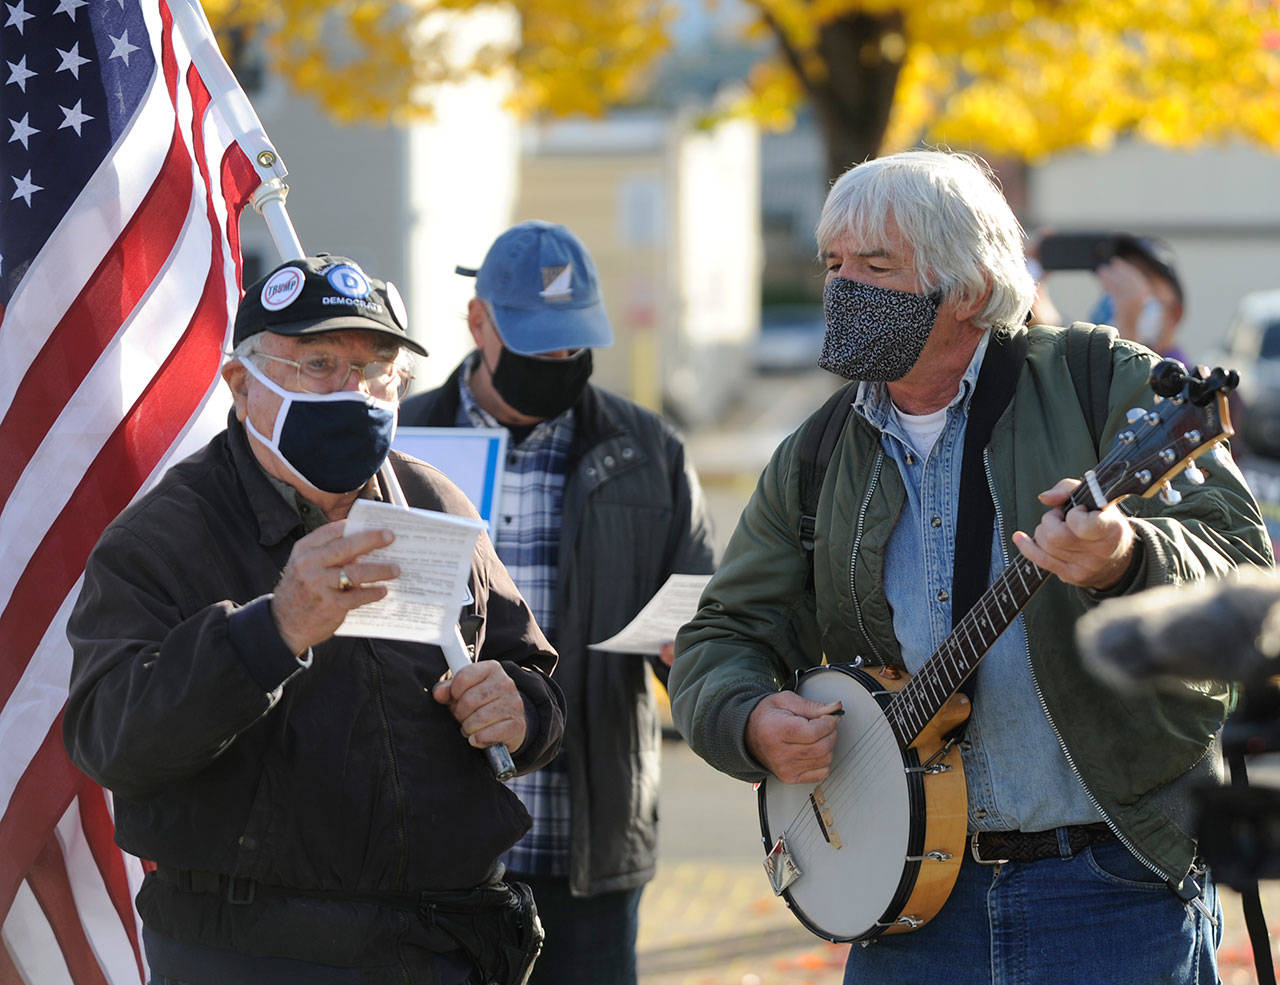 Tim Wheeler, left, and a group of about 40 individuals sing Woody Guthrie’s “This Land Is Your Land,” accompanied by Steve Koehler on banjo, at the Sequim Civic Center on Wednesday afternoon. (Michael Dashiell/Olympic Peninsula News Group)